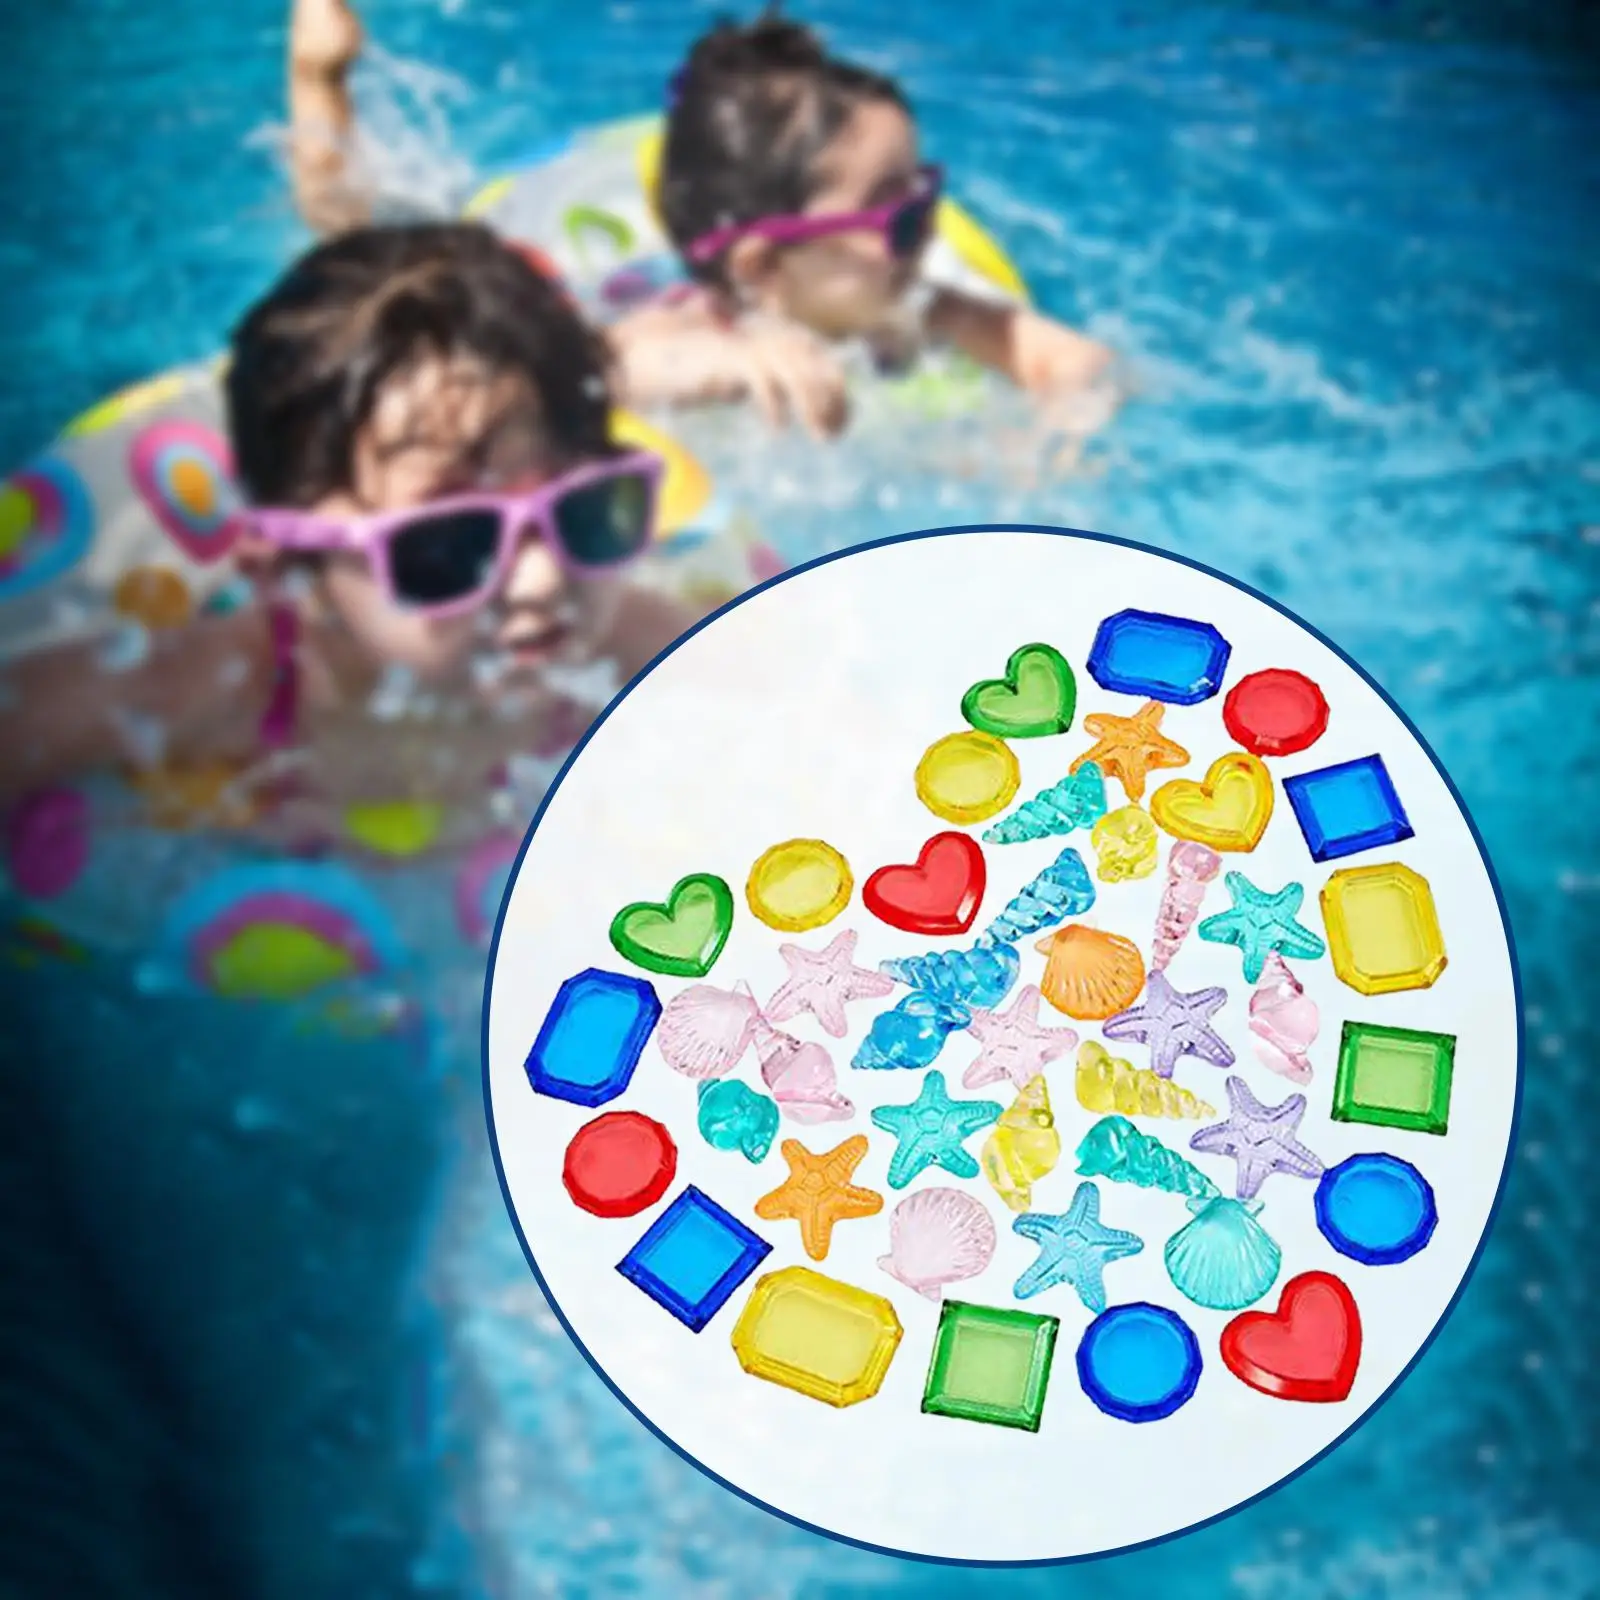 Multipurpose Diving Toy Interactive Toys Color Sorting Present Motor Skill Game Decoration for Parties Family Swimming Pool